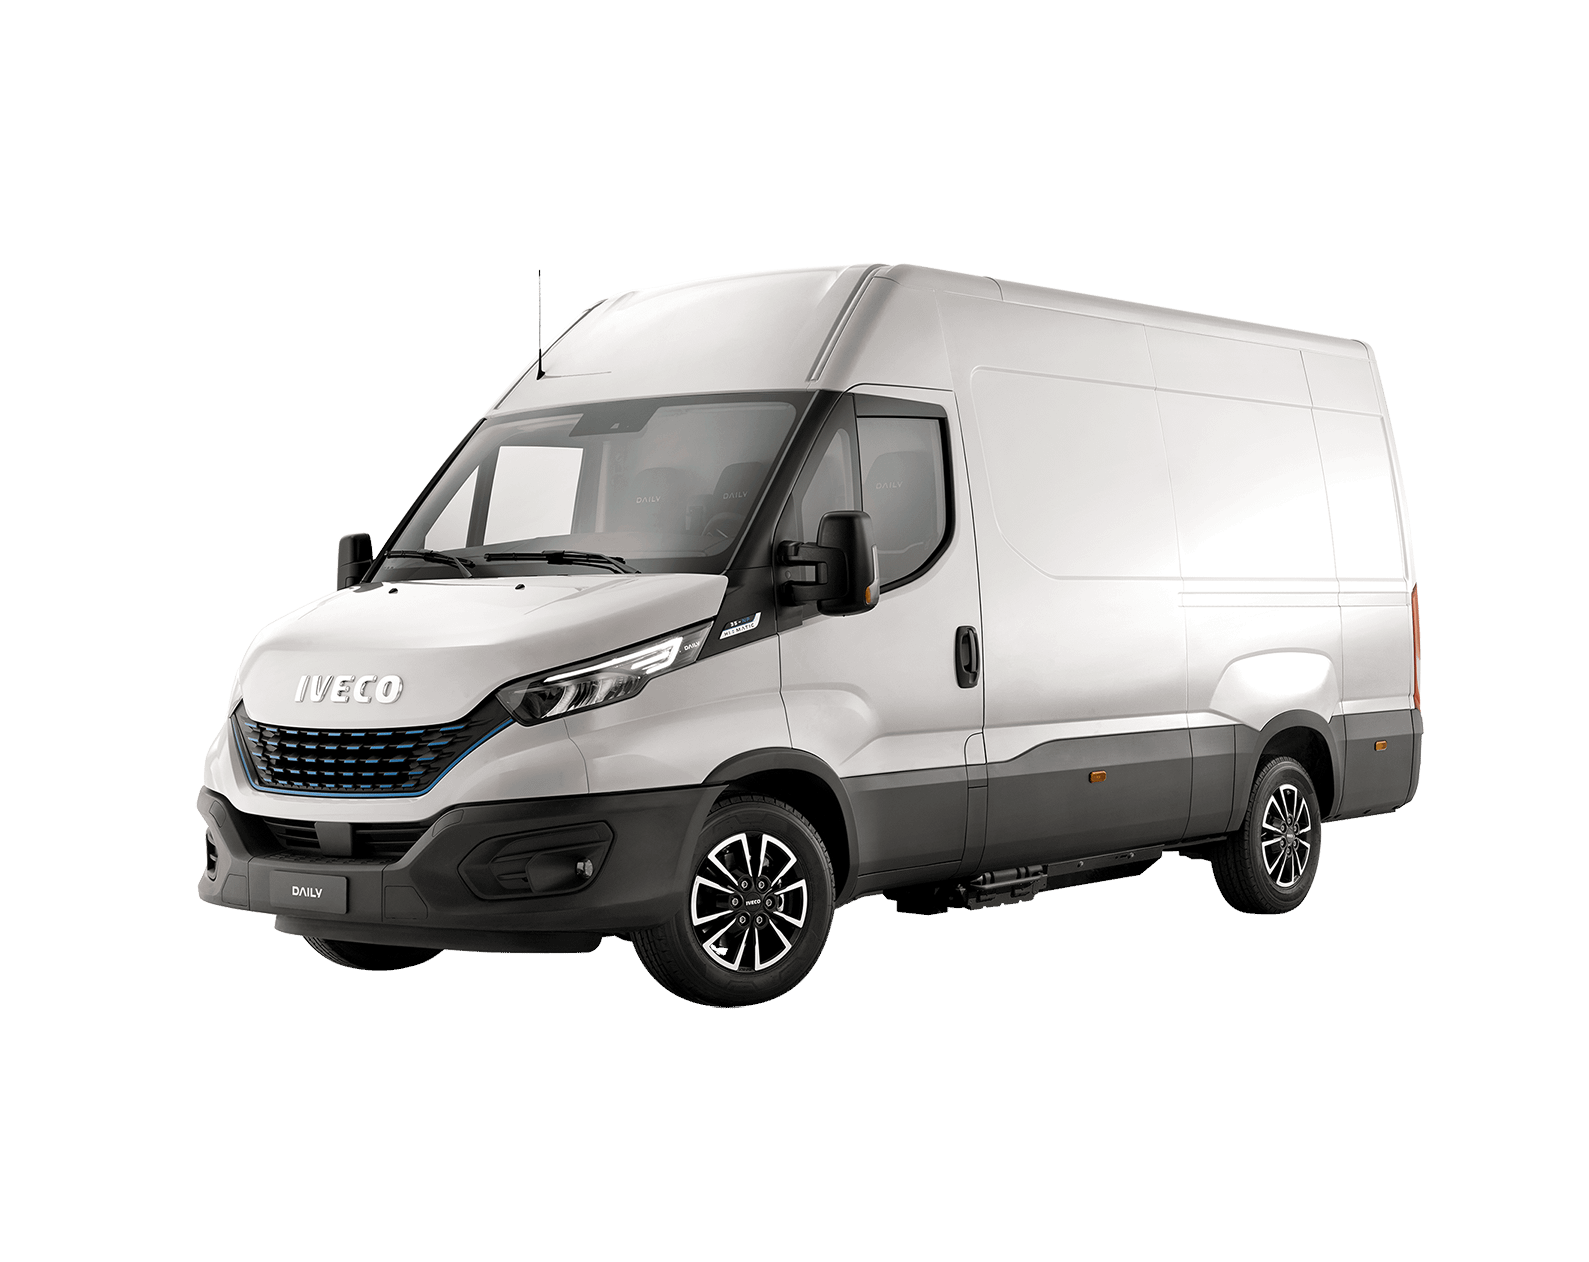 https://bluesky-cogcms.cdn.imgeng.in/media/15700/iveco-daily-cutout.png